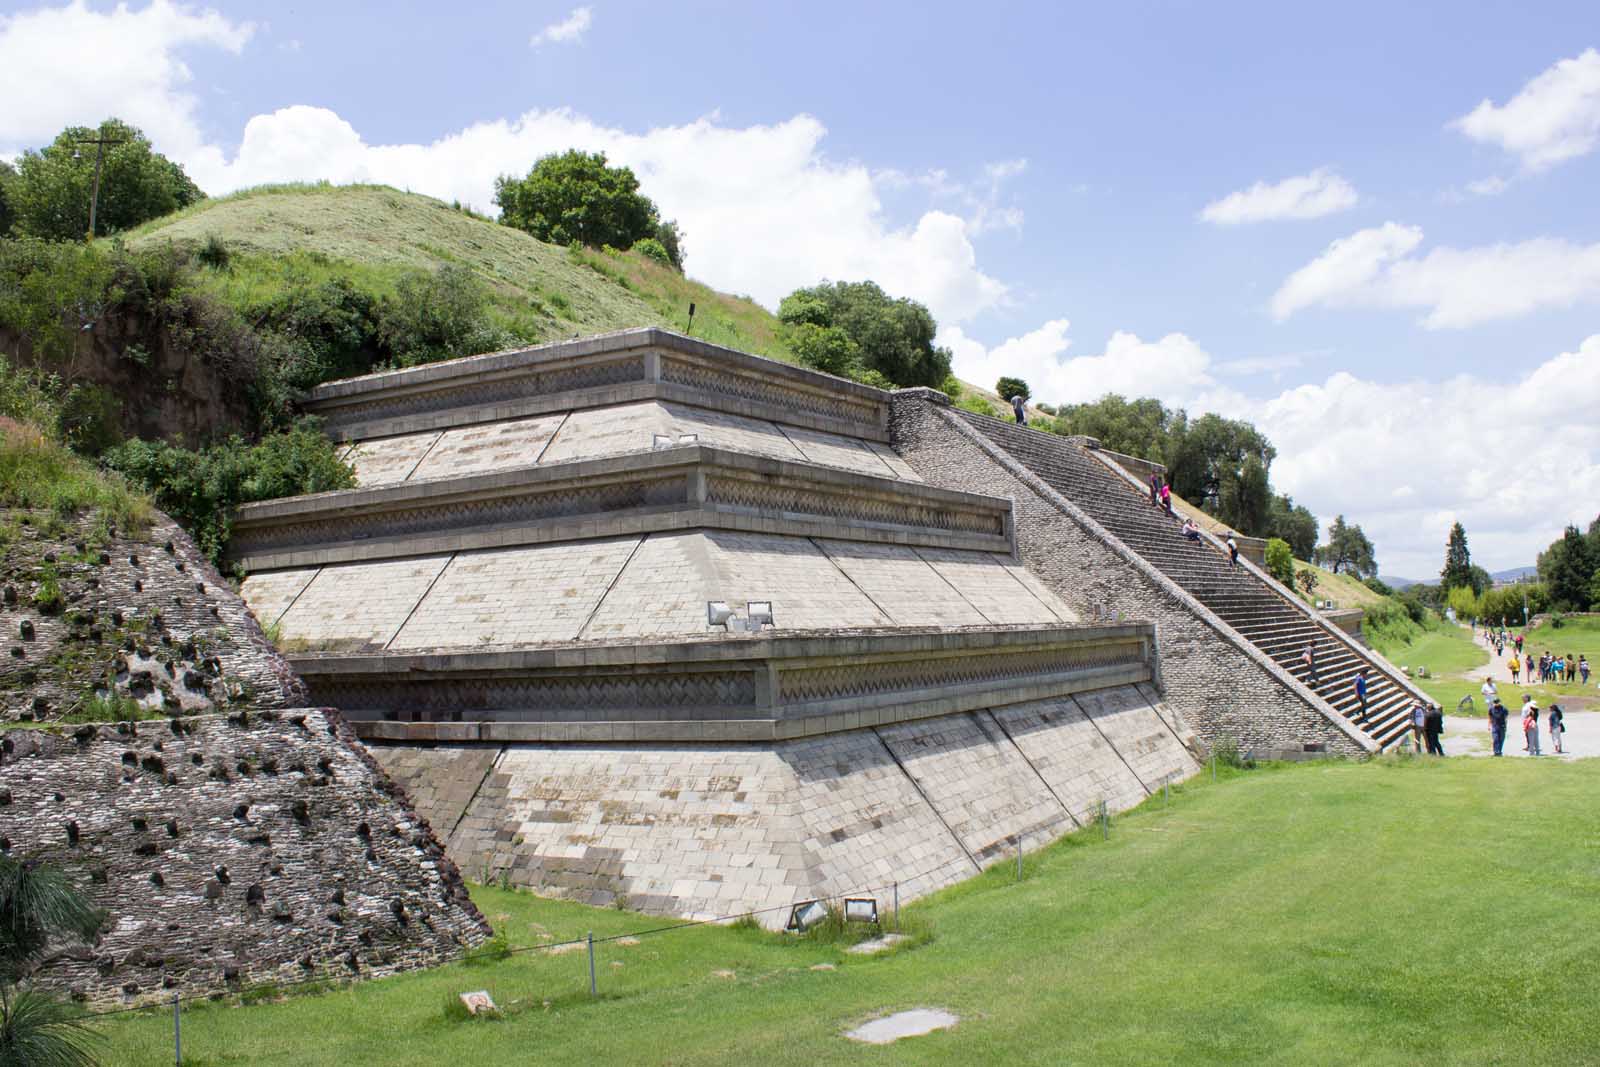 facts about mexico cholula world's largest pyramid